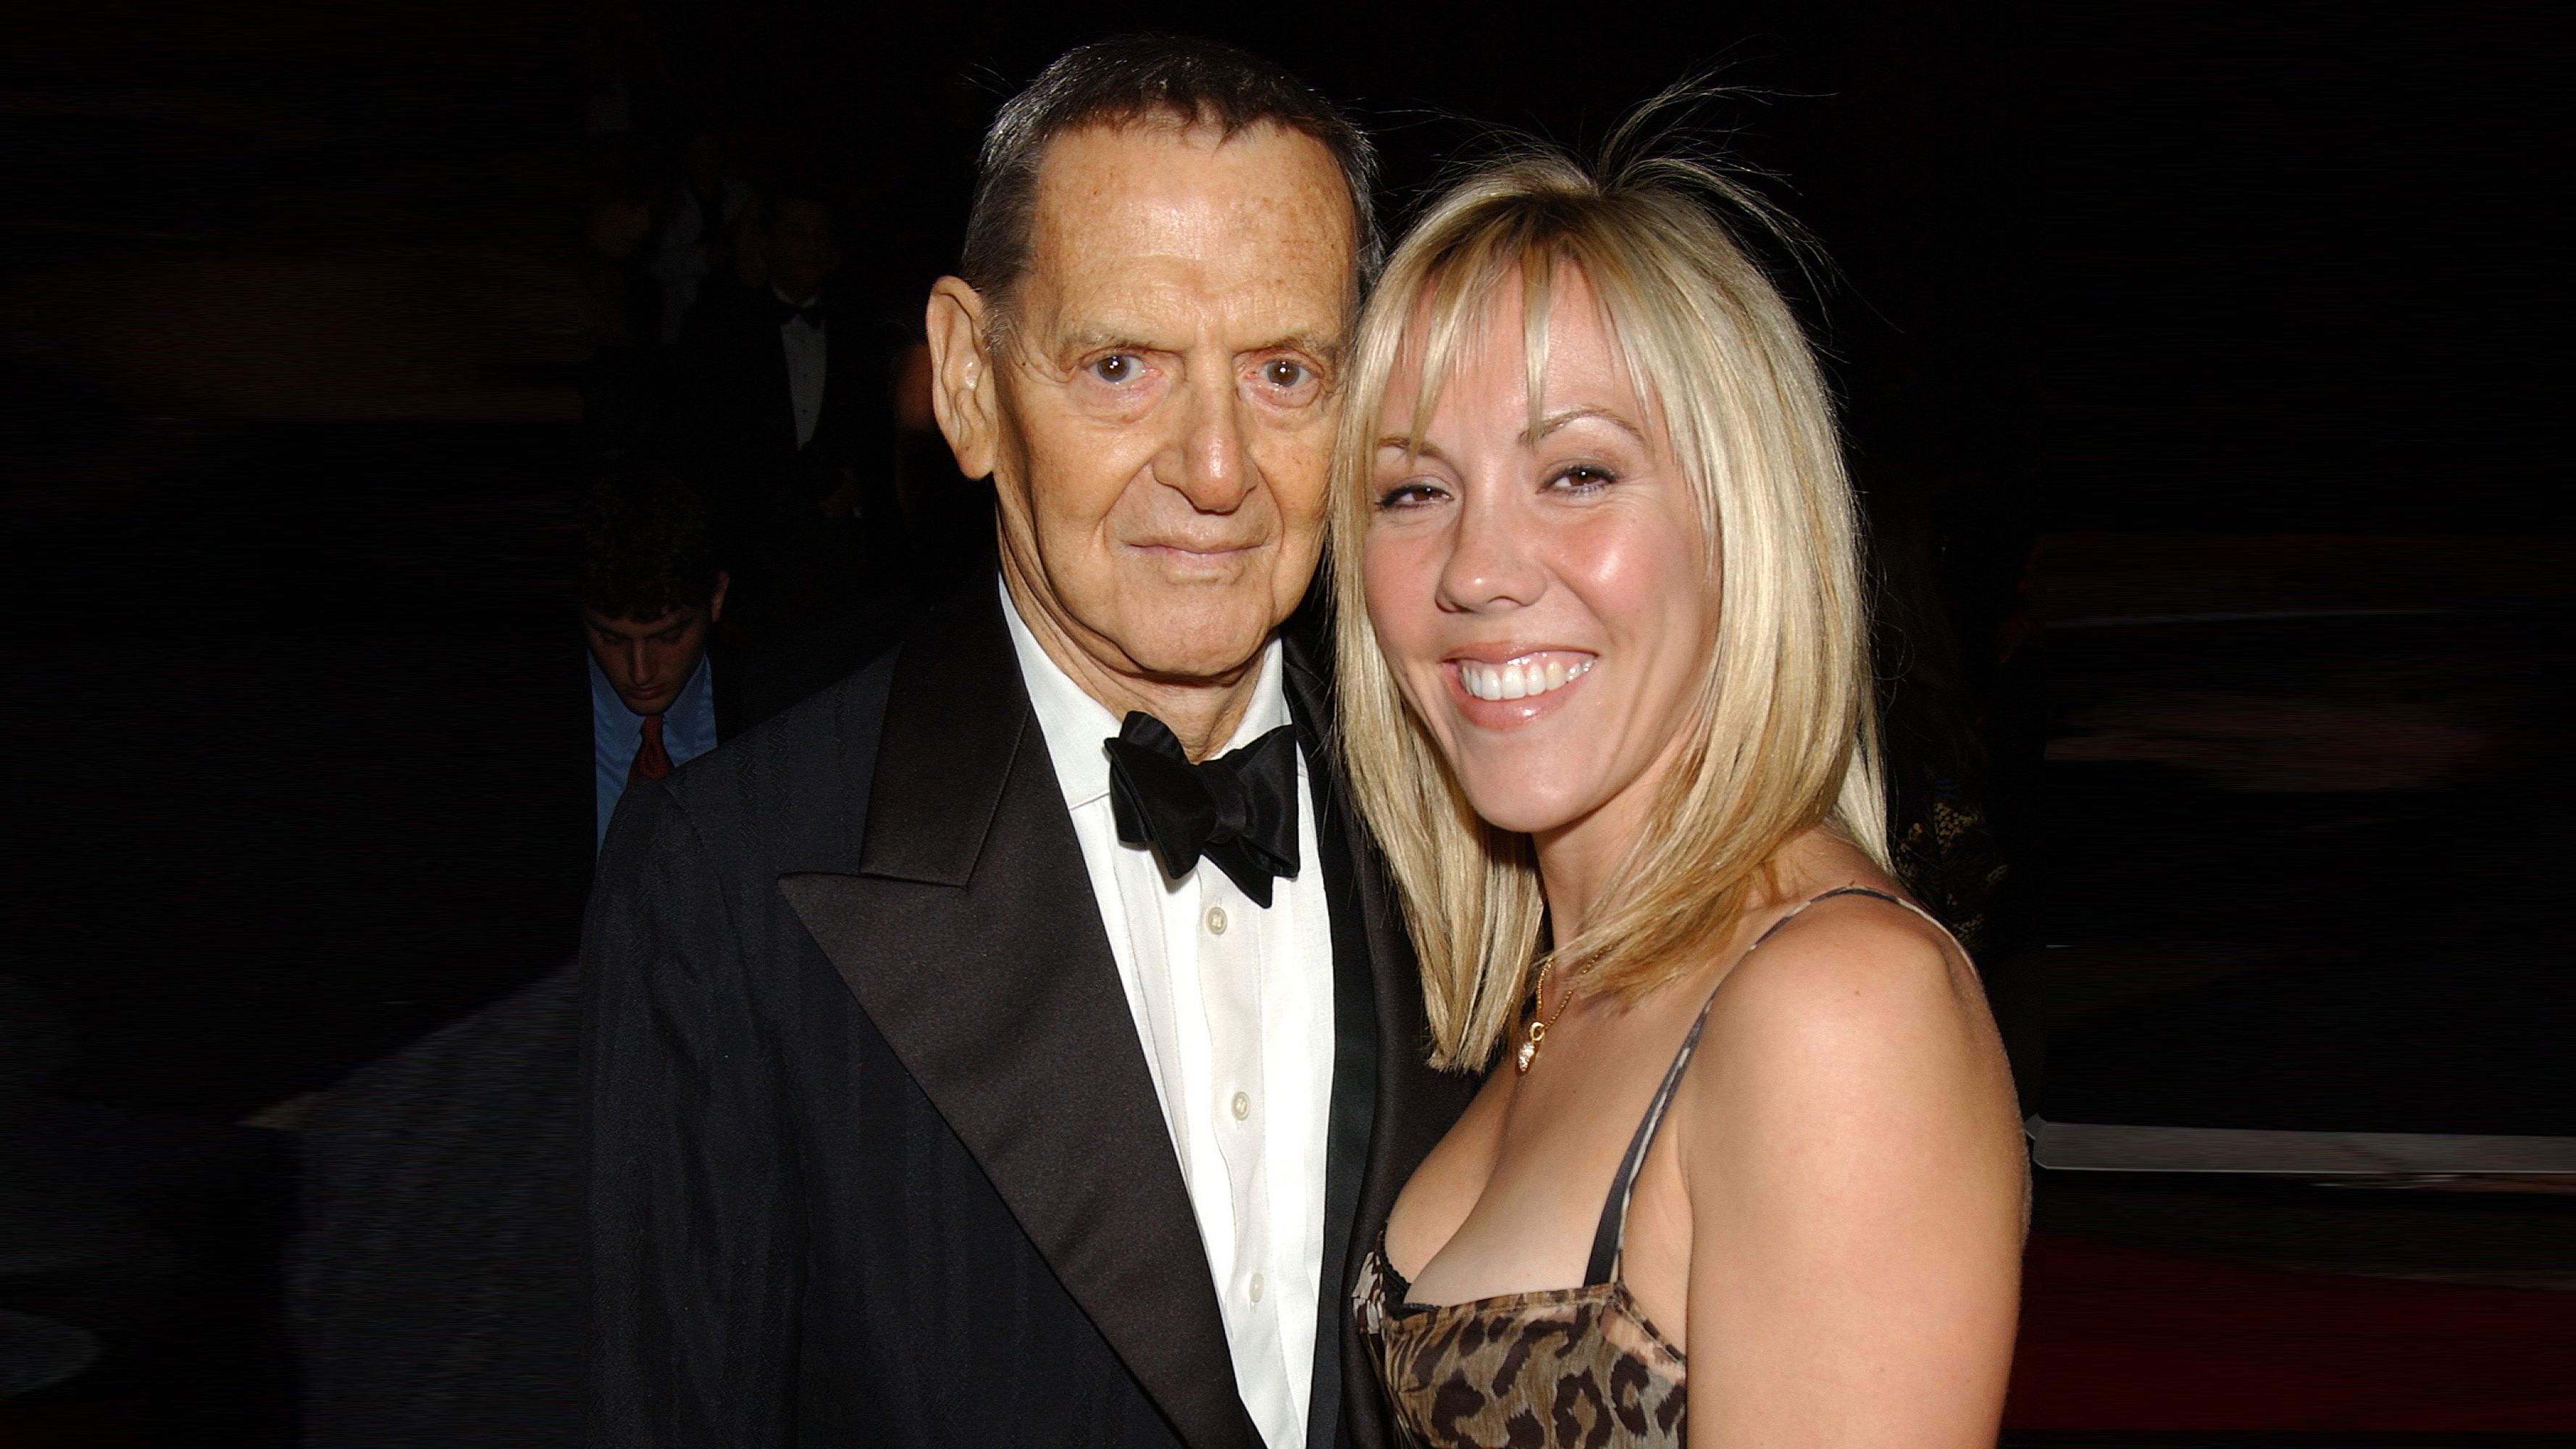 Heather Randall, Wife of Tony Randall The Marie Claire Interview Marie Claire photo